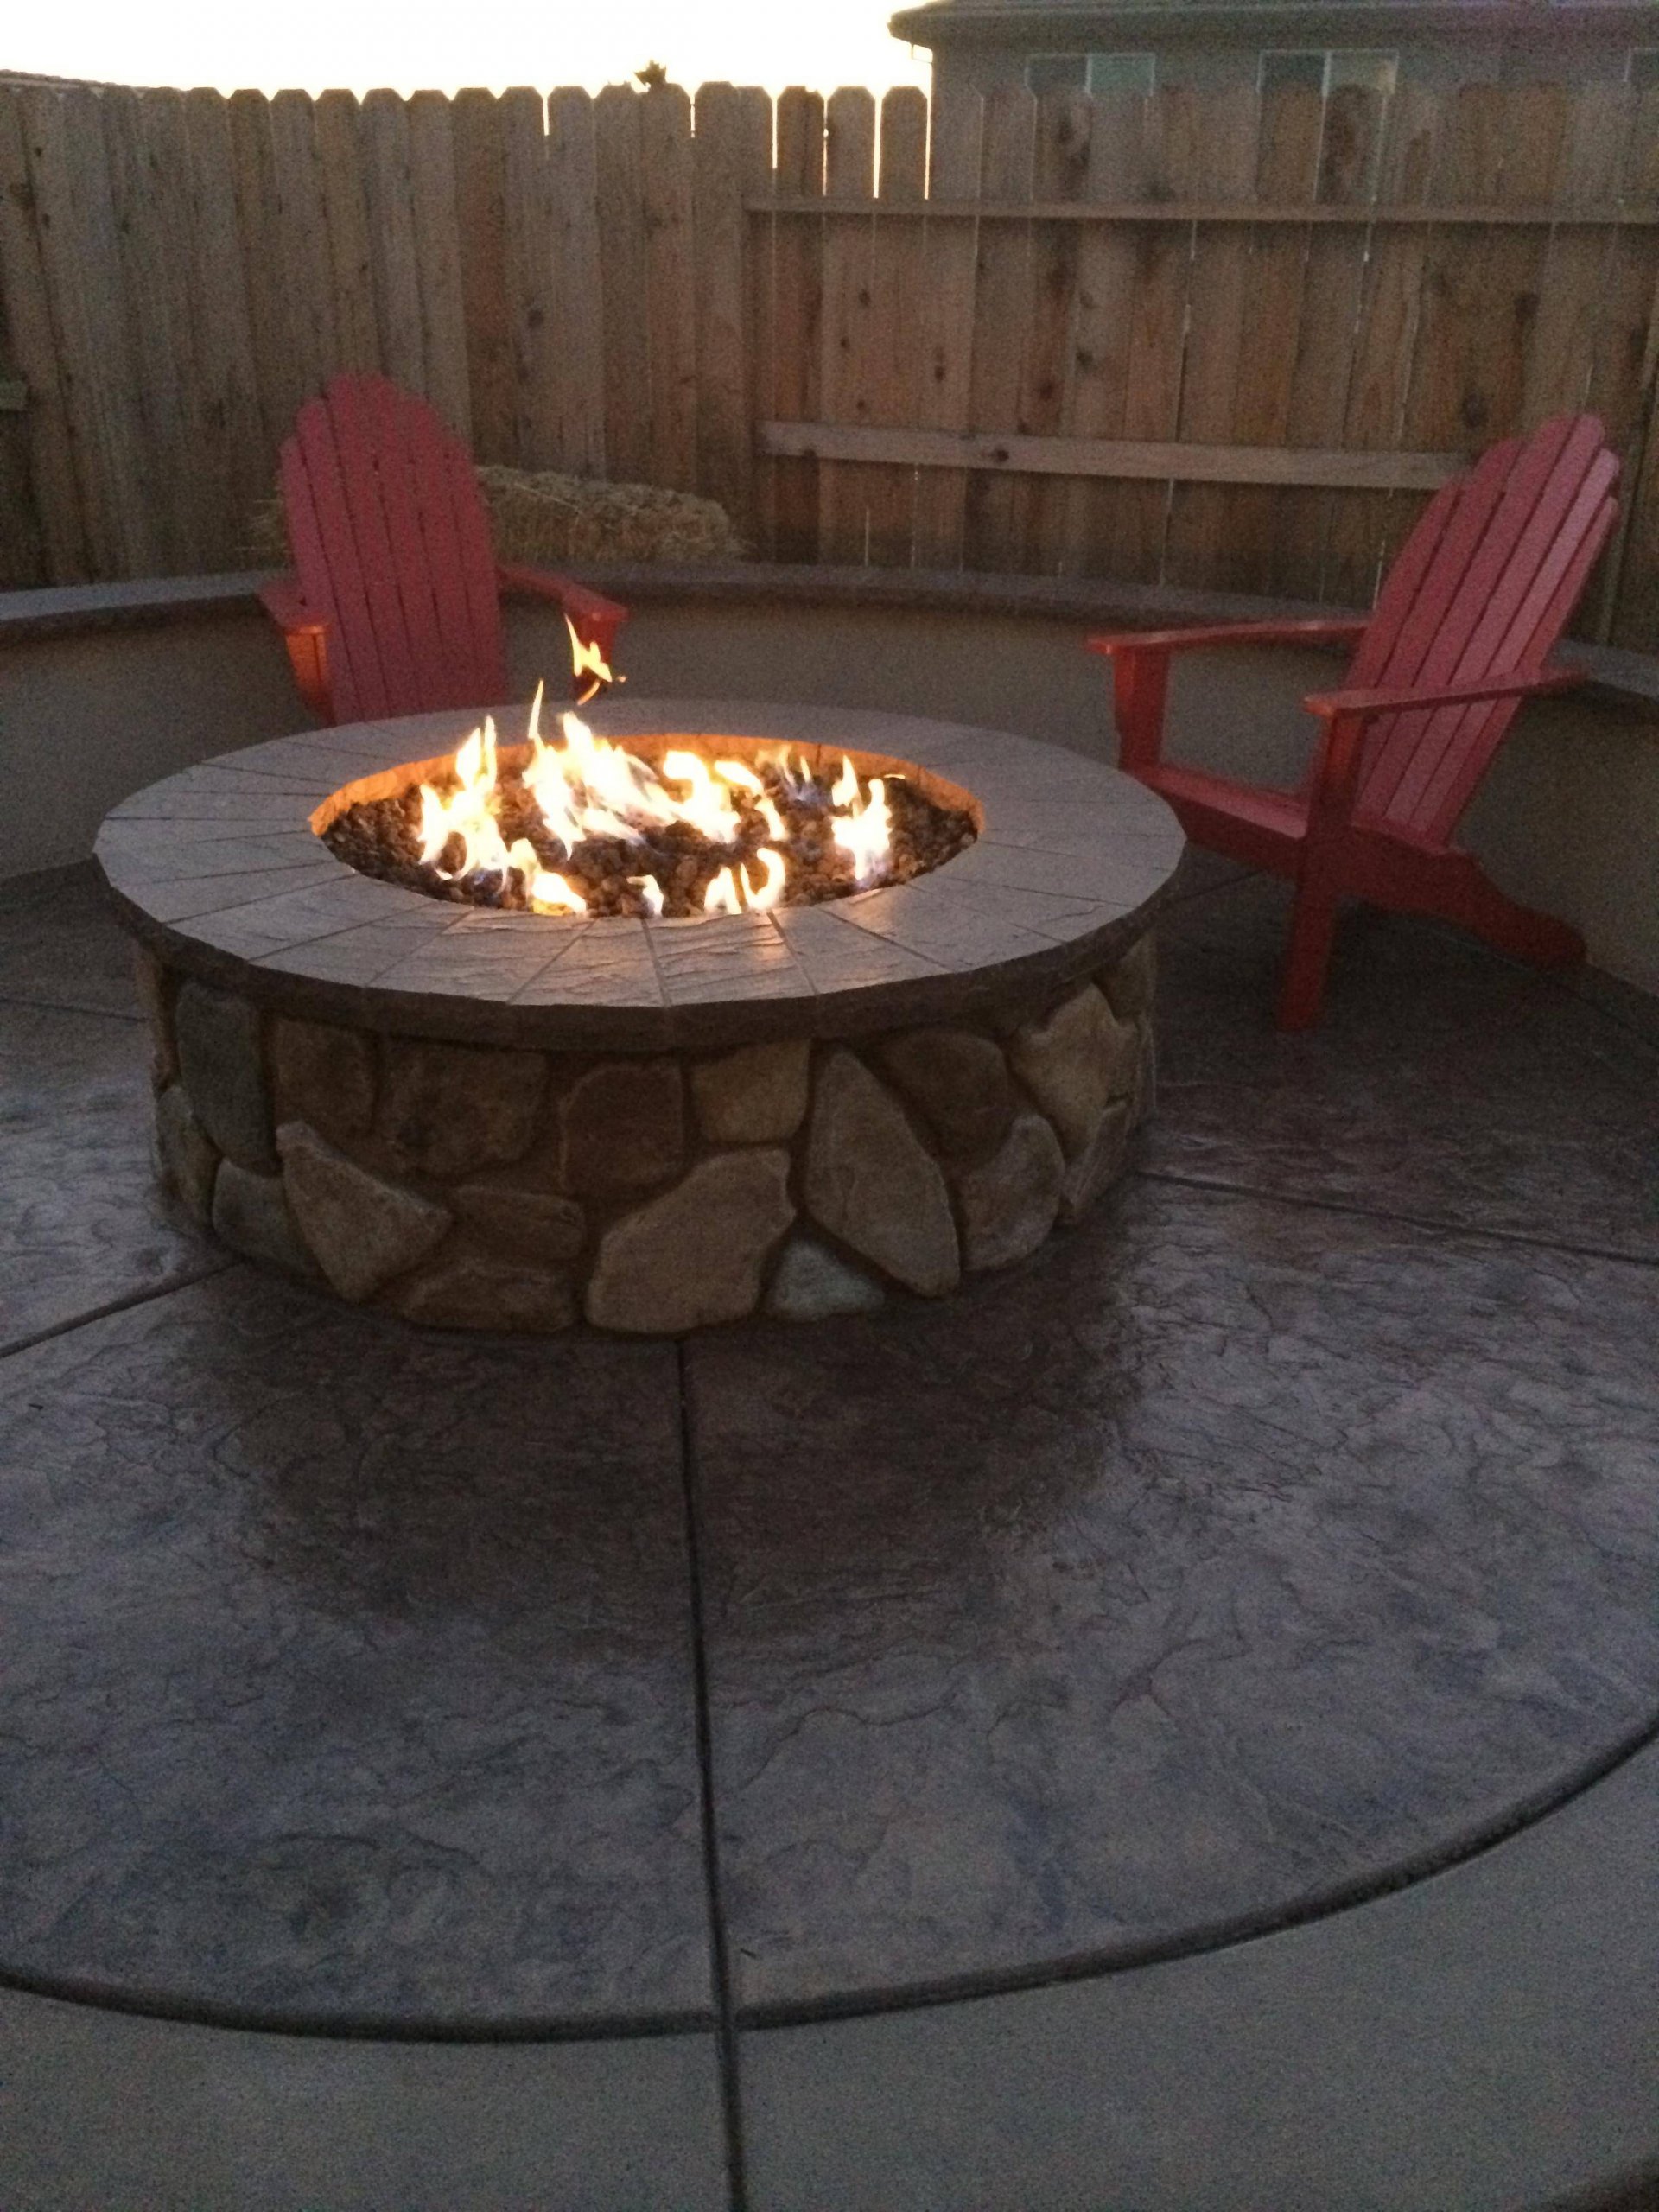 Fire Pit Ring Insert Ers Guide, Fire Pit Bowl Insert Only